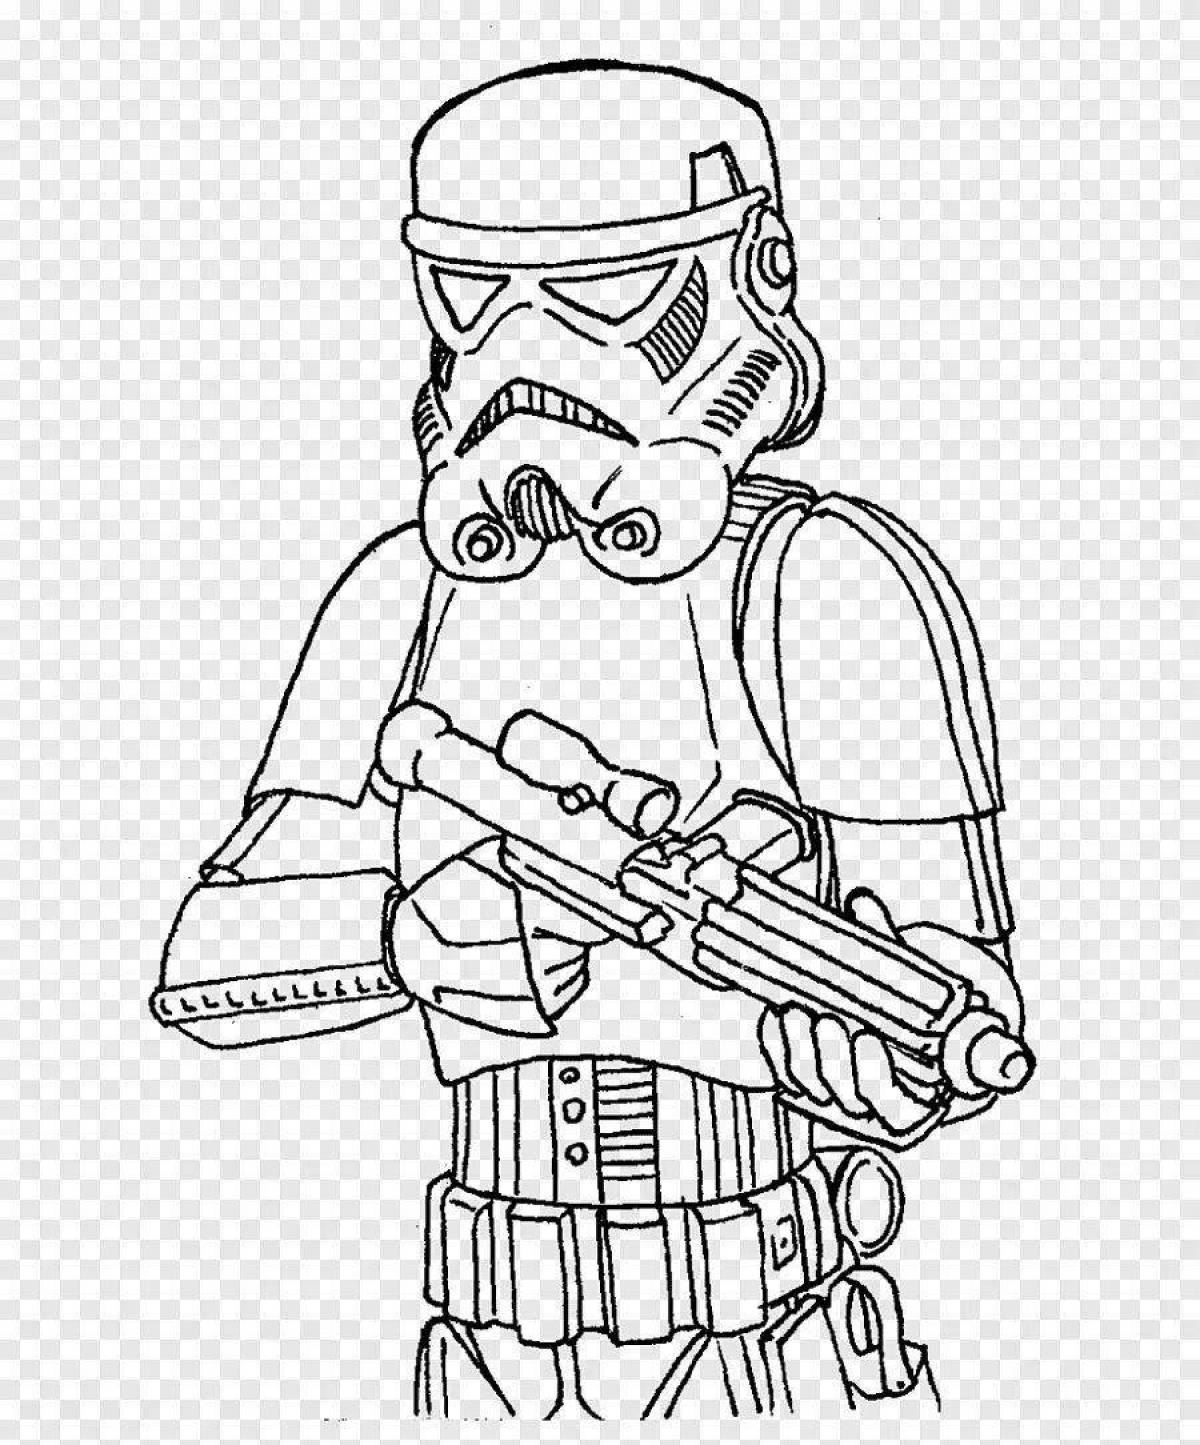 Colorful stormtrooper coloring page